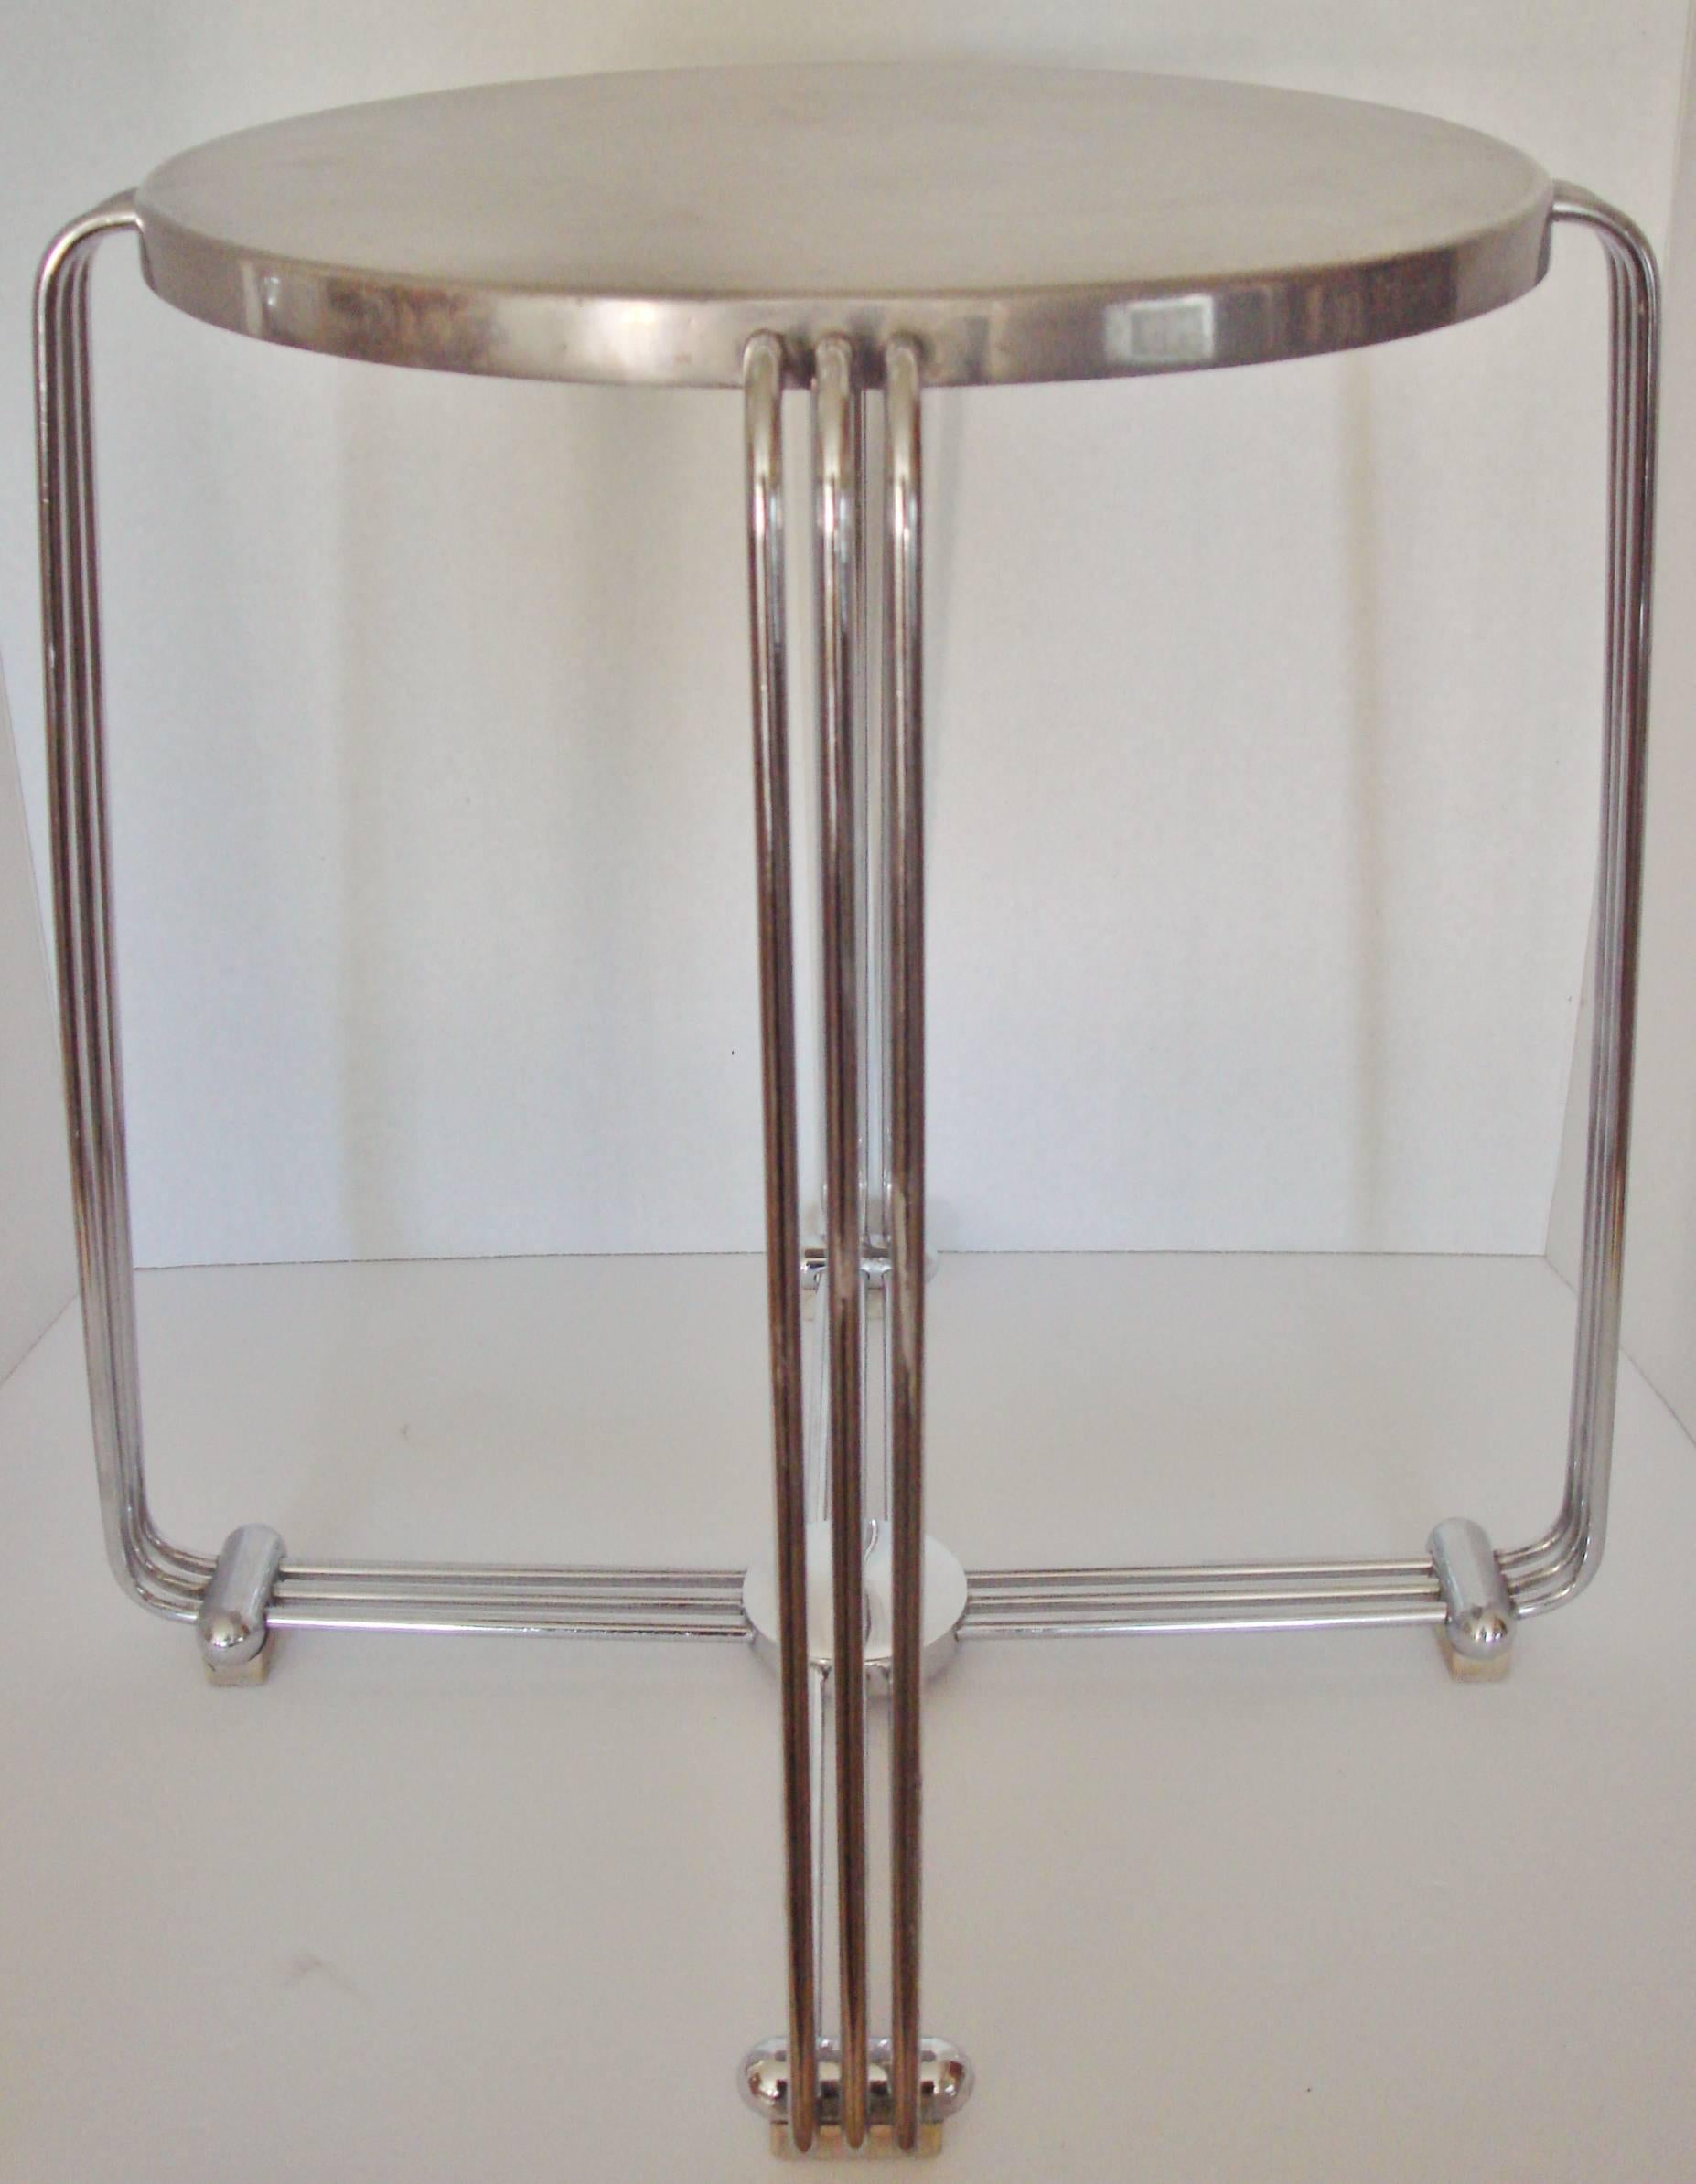 This example of the iconic Alpax English Art Deco side table or stool consists of a chrome four legged base with blonde block wood feet and a cast aluminium top. It is signed to the underside with the 'Alpax' logo in an Art Deco style, has all its